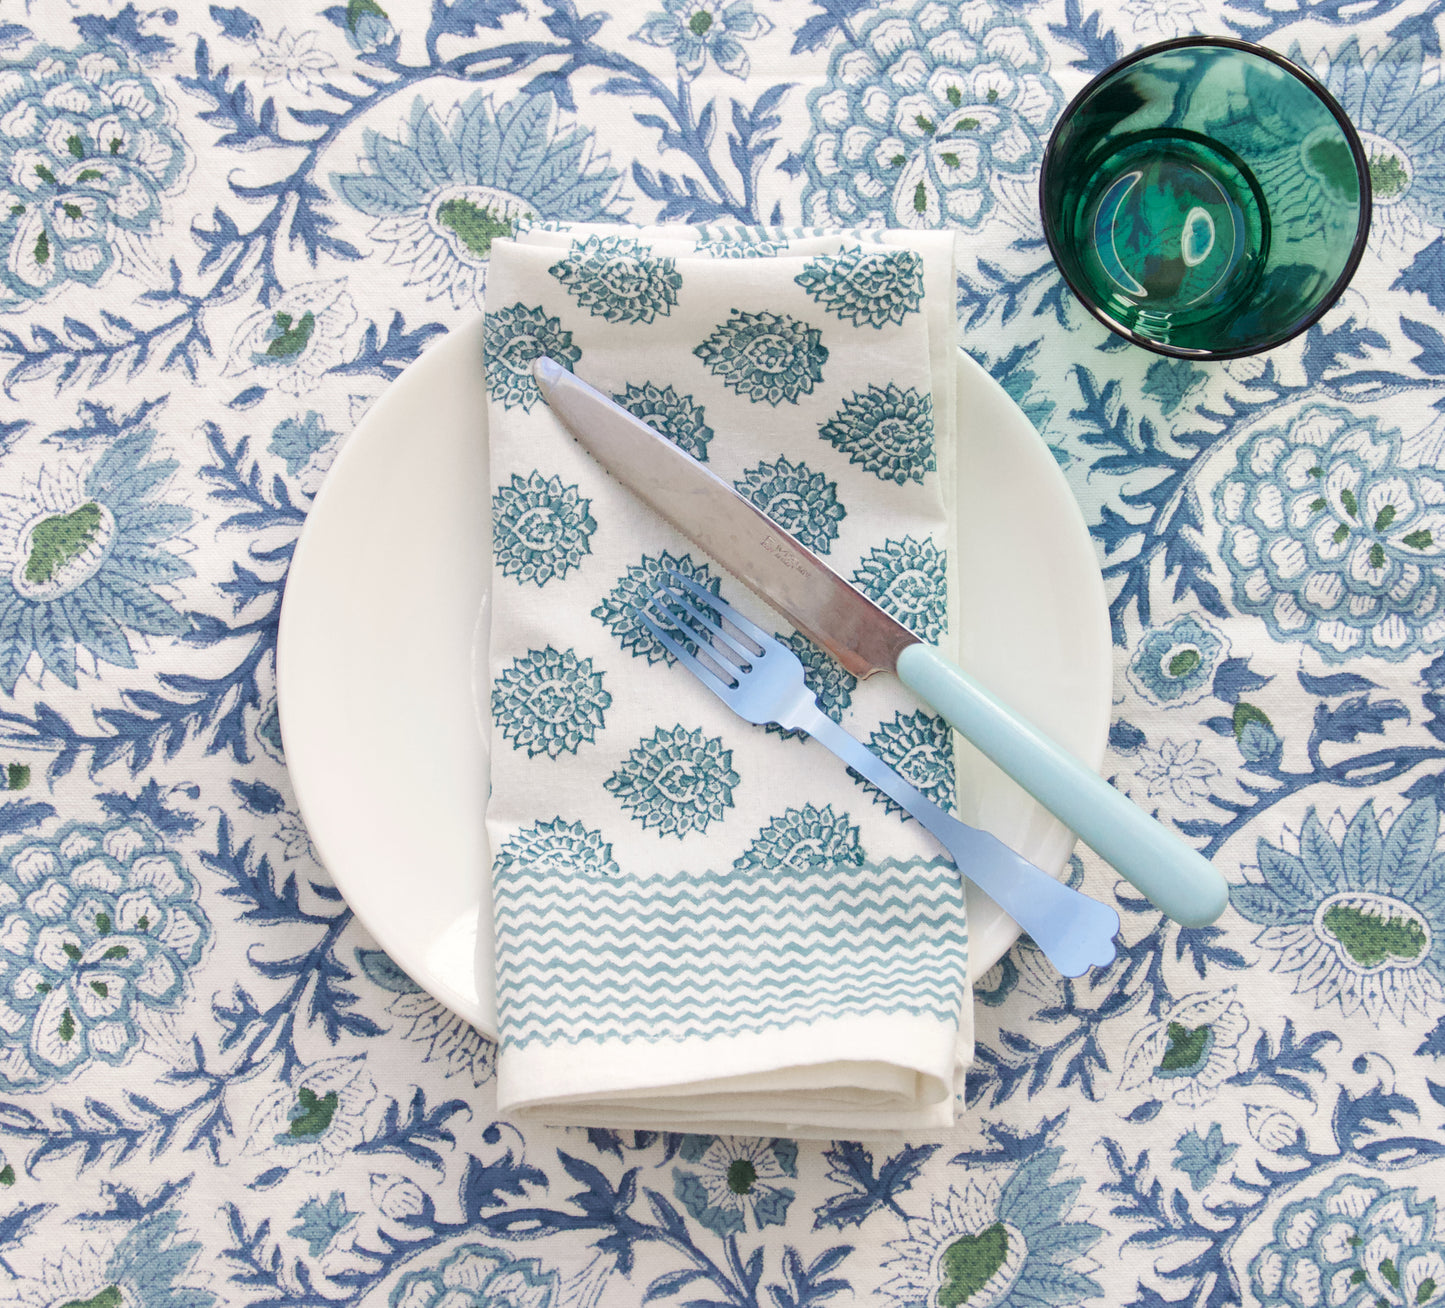 Block Printed Cotton Tablecloth in Sunny Day Floral Print